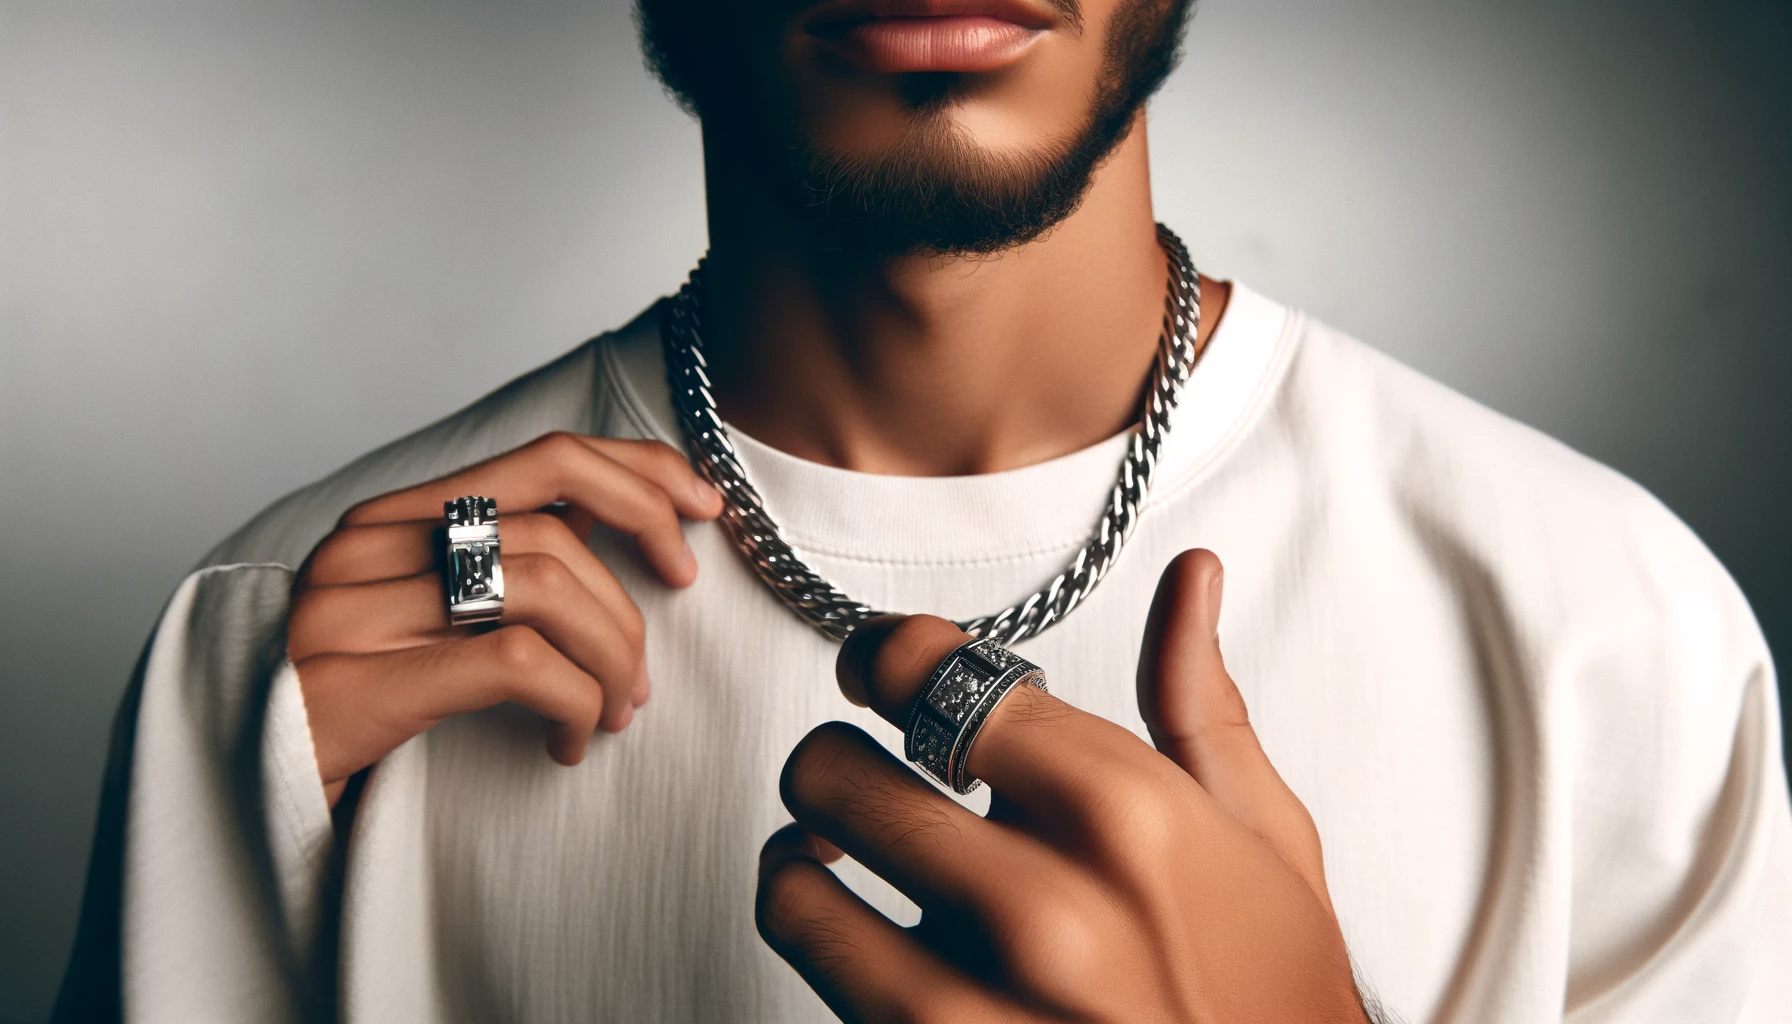 Man With Masculine Style, Featuring Sleek Silver Chain Necklace And Bold Statement Ring.